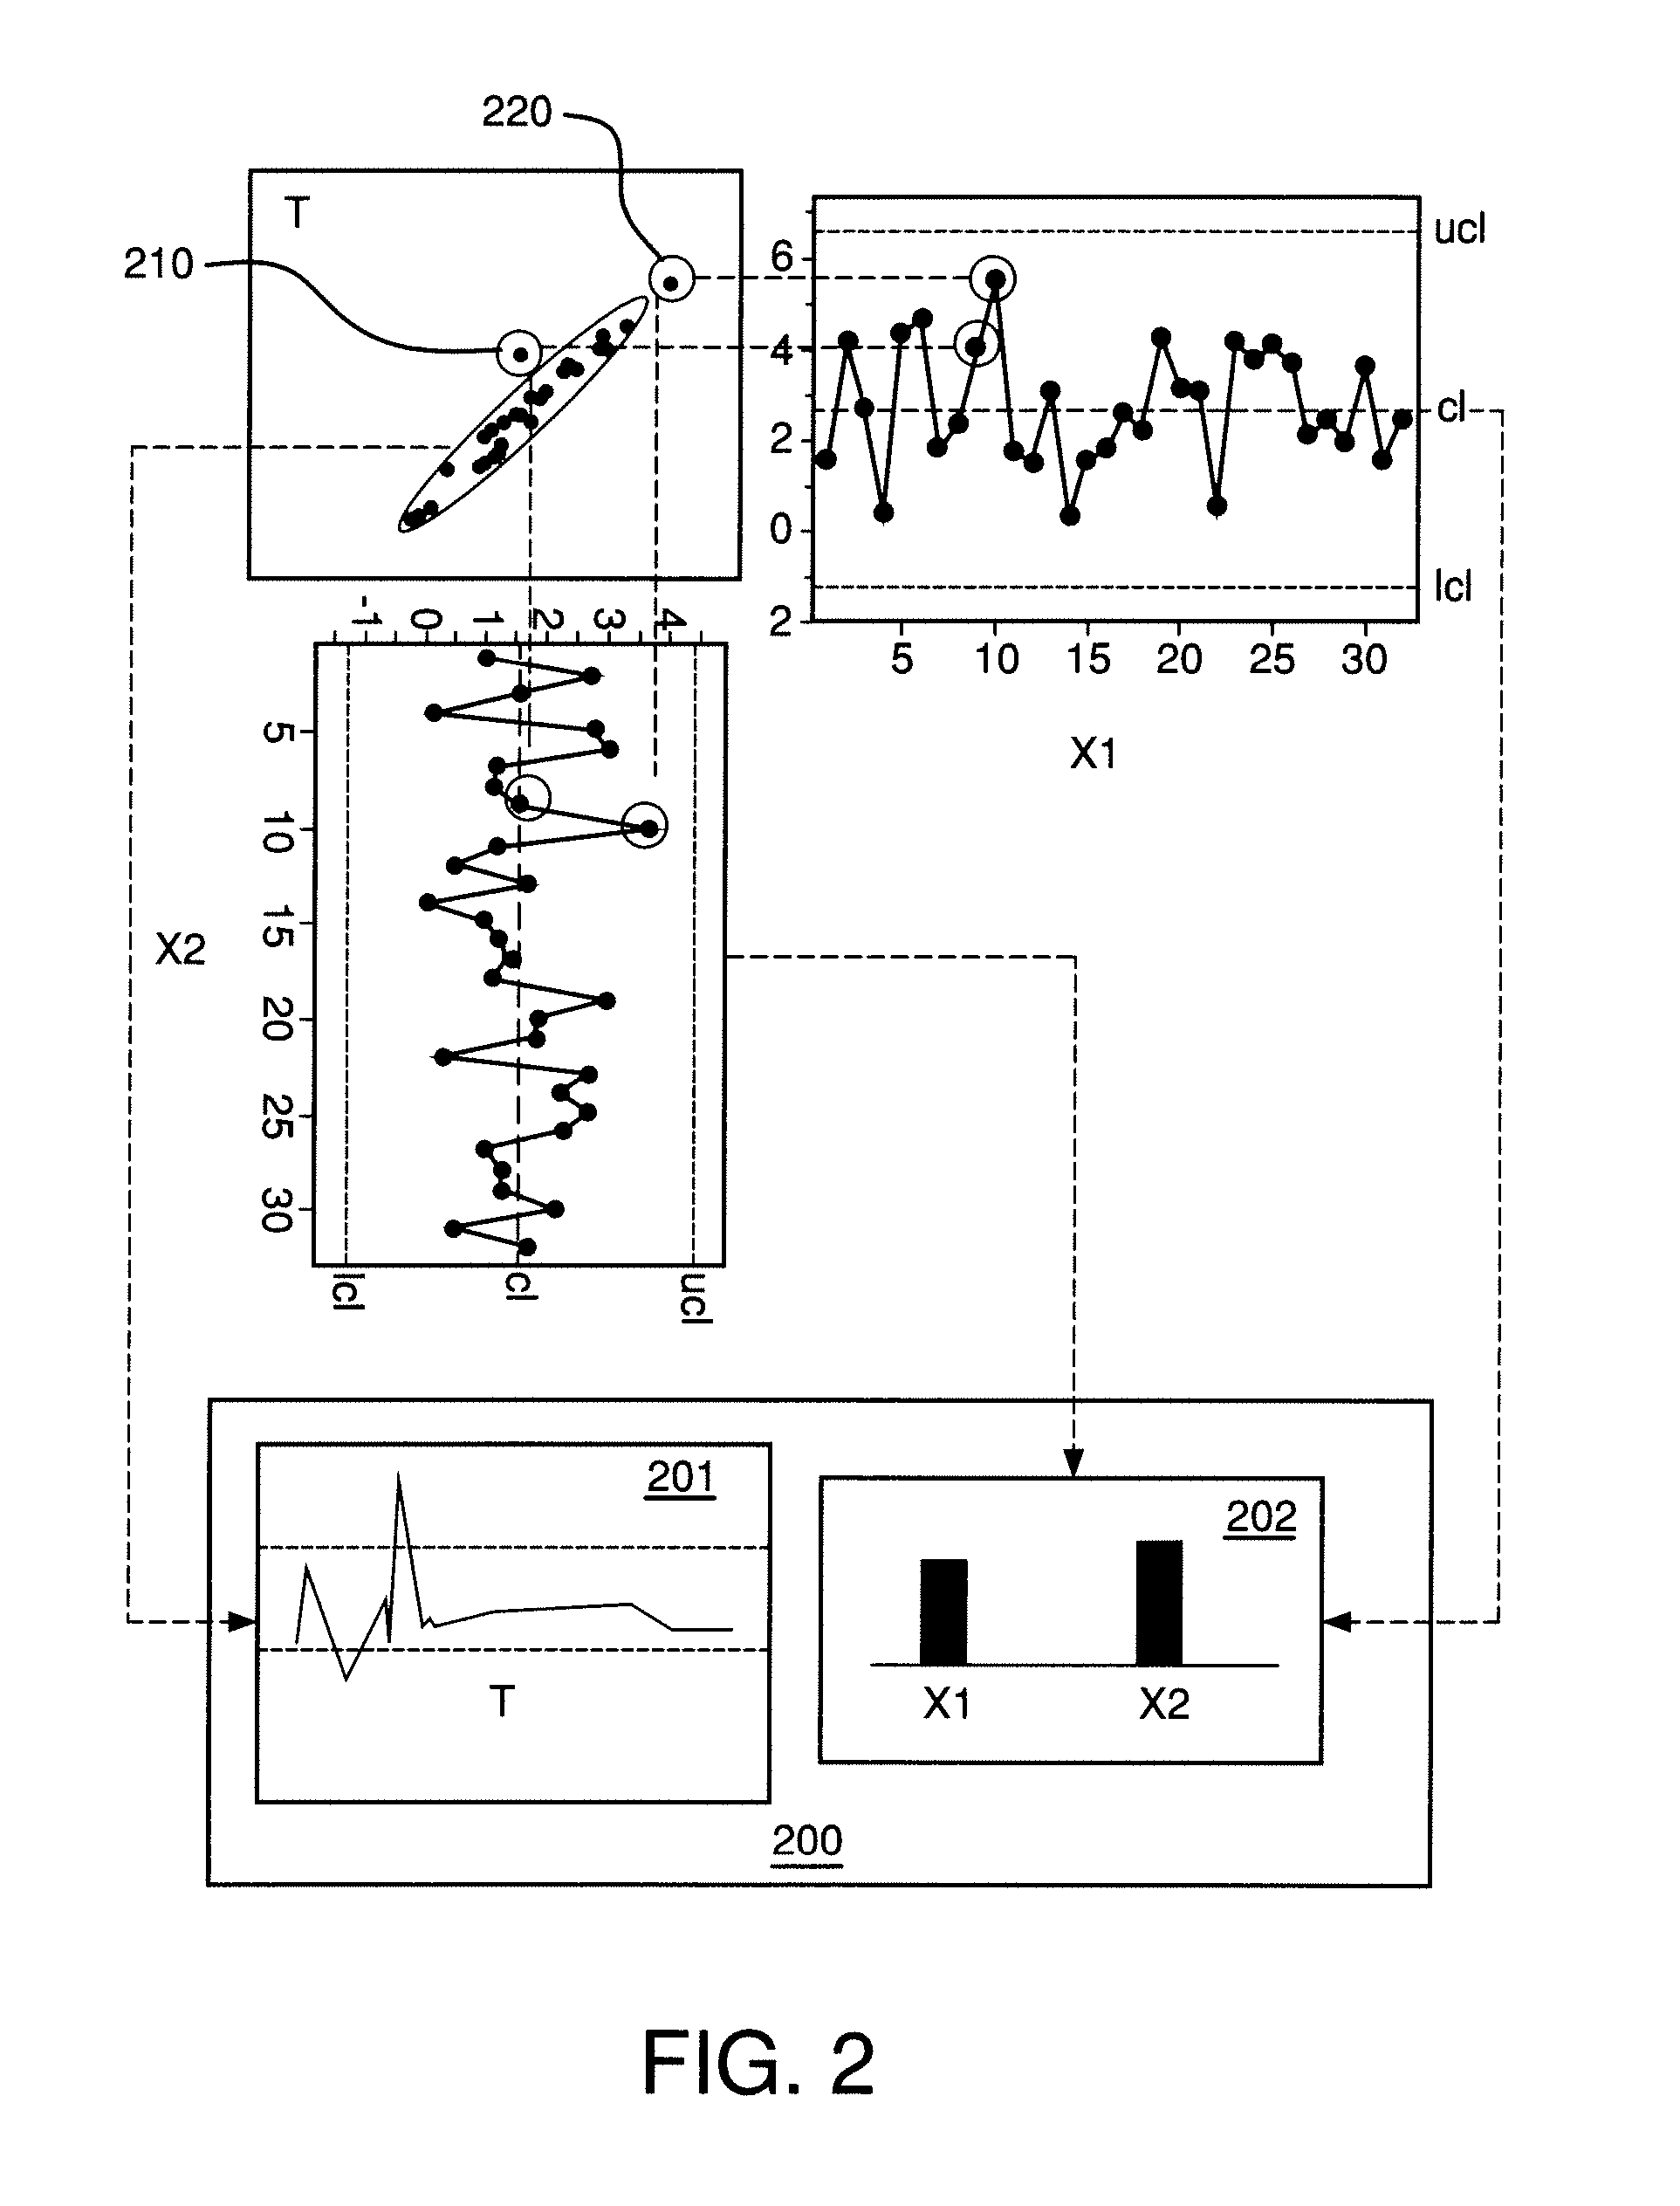 System and method for process monitoring